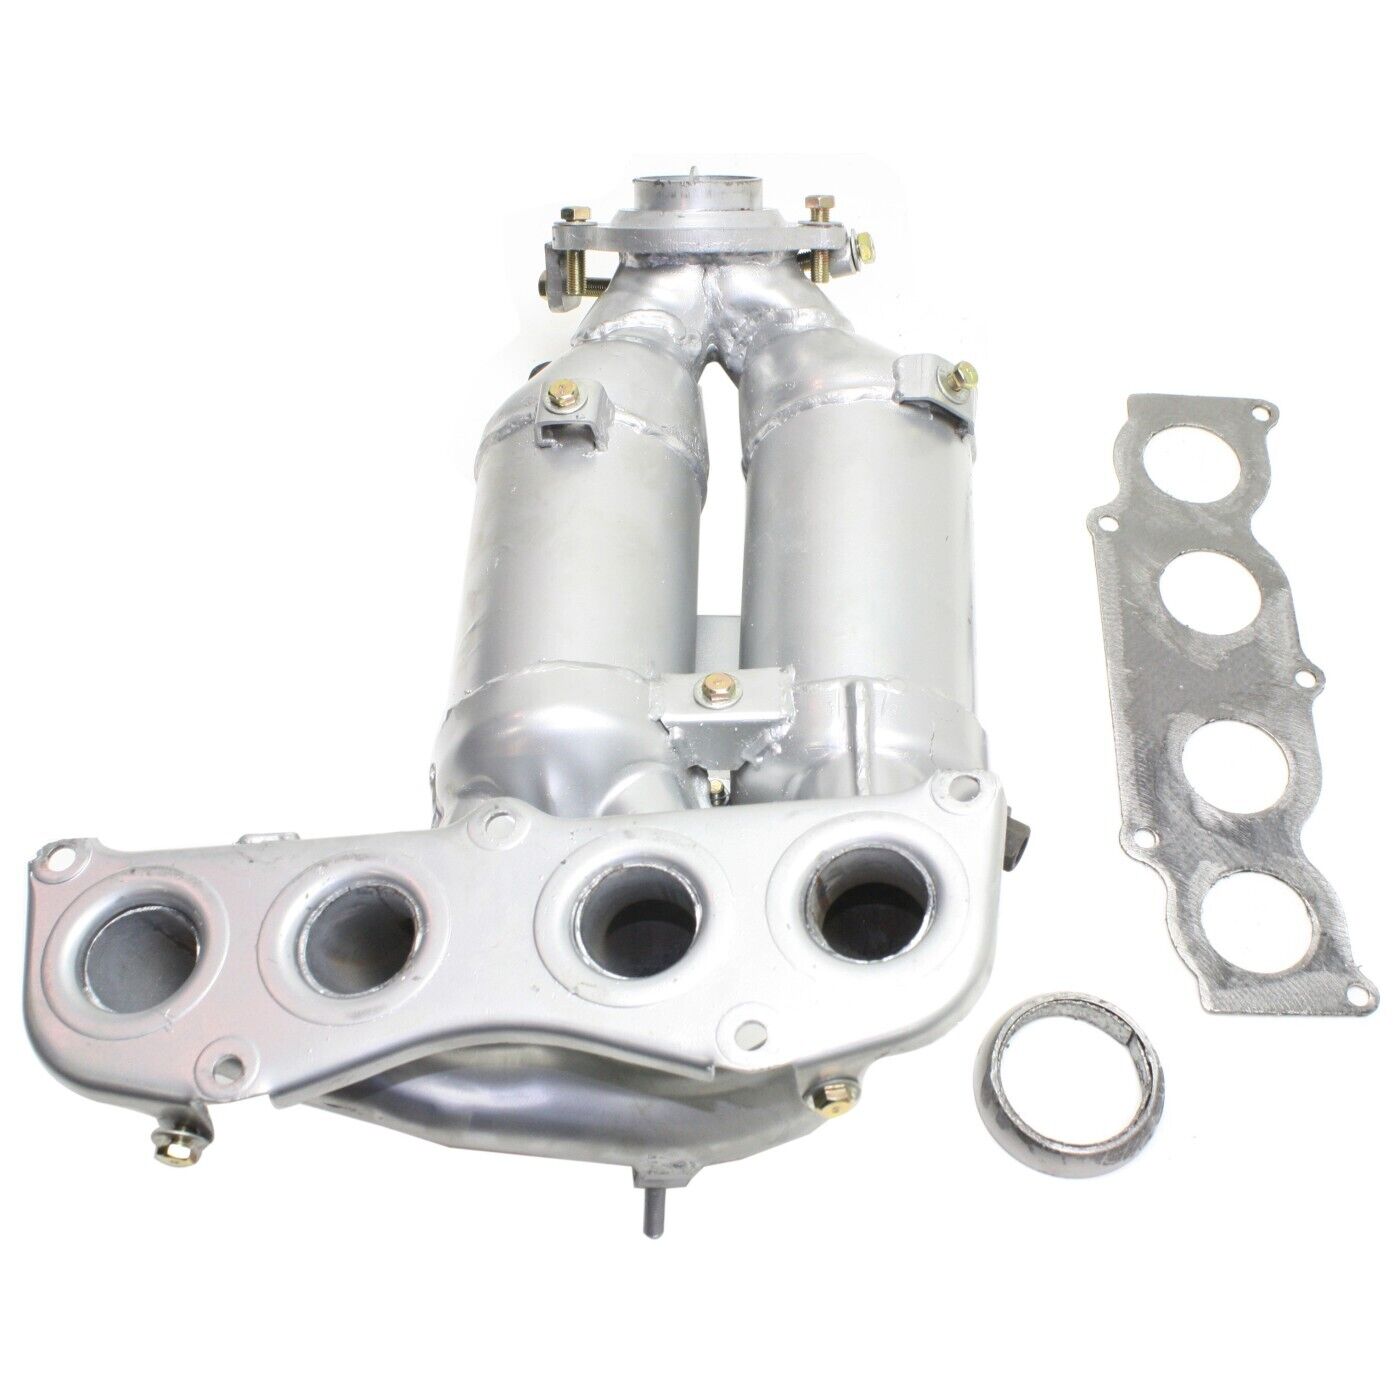 New Catalytic Converter For 2001-2003 Toyota Highlander with Exhaust Manifold